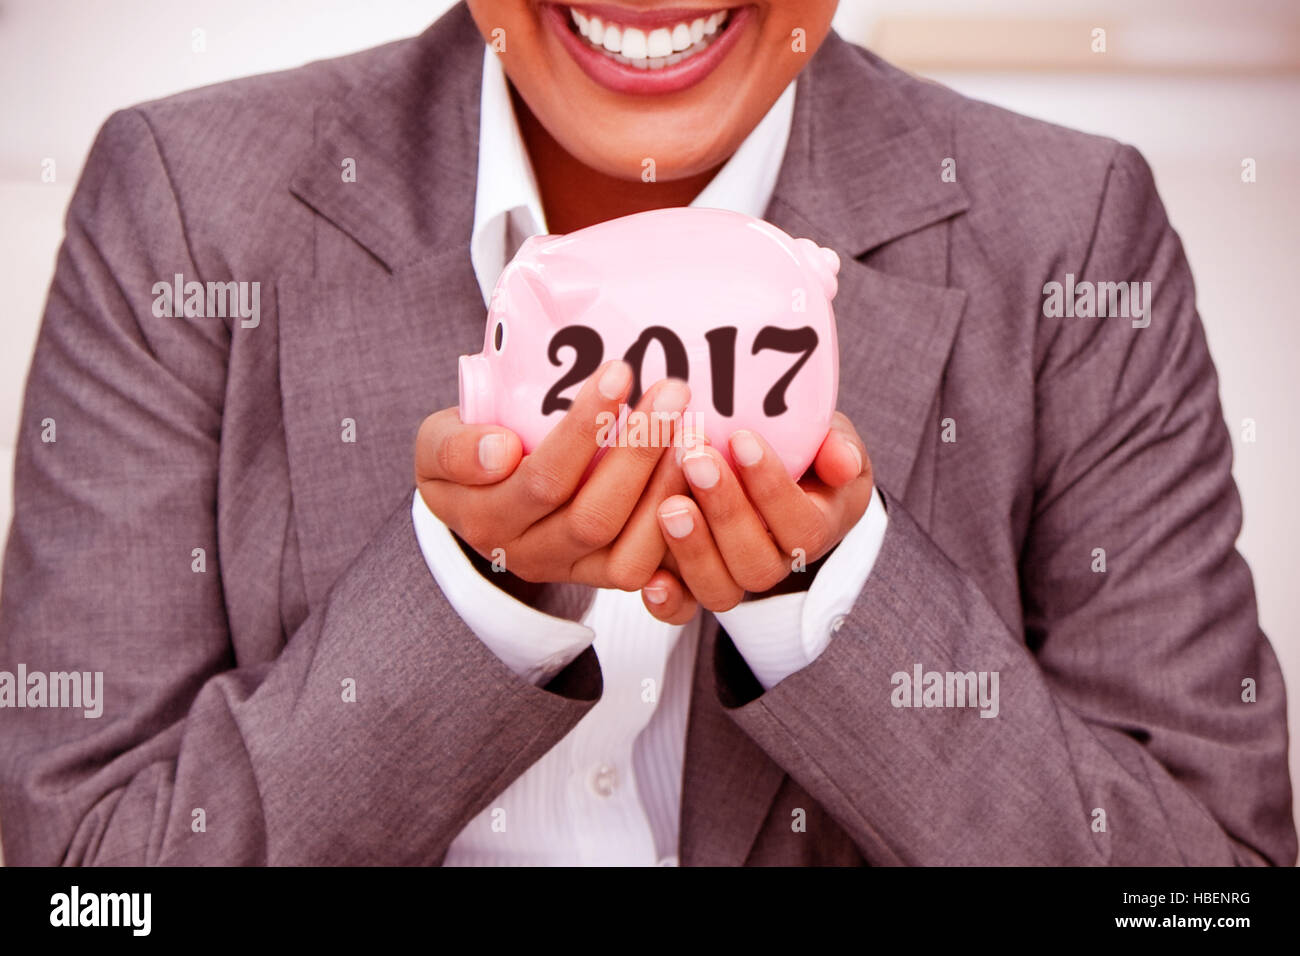 Composite image of close up of a smiling businesswoman holding a piggybank Stock Photo